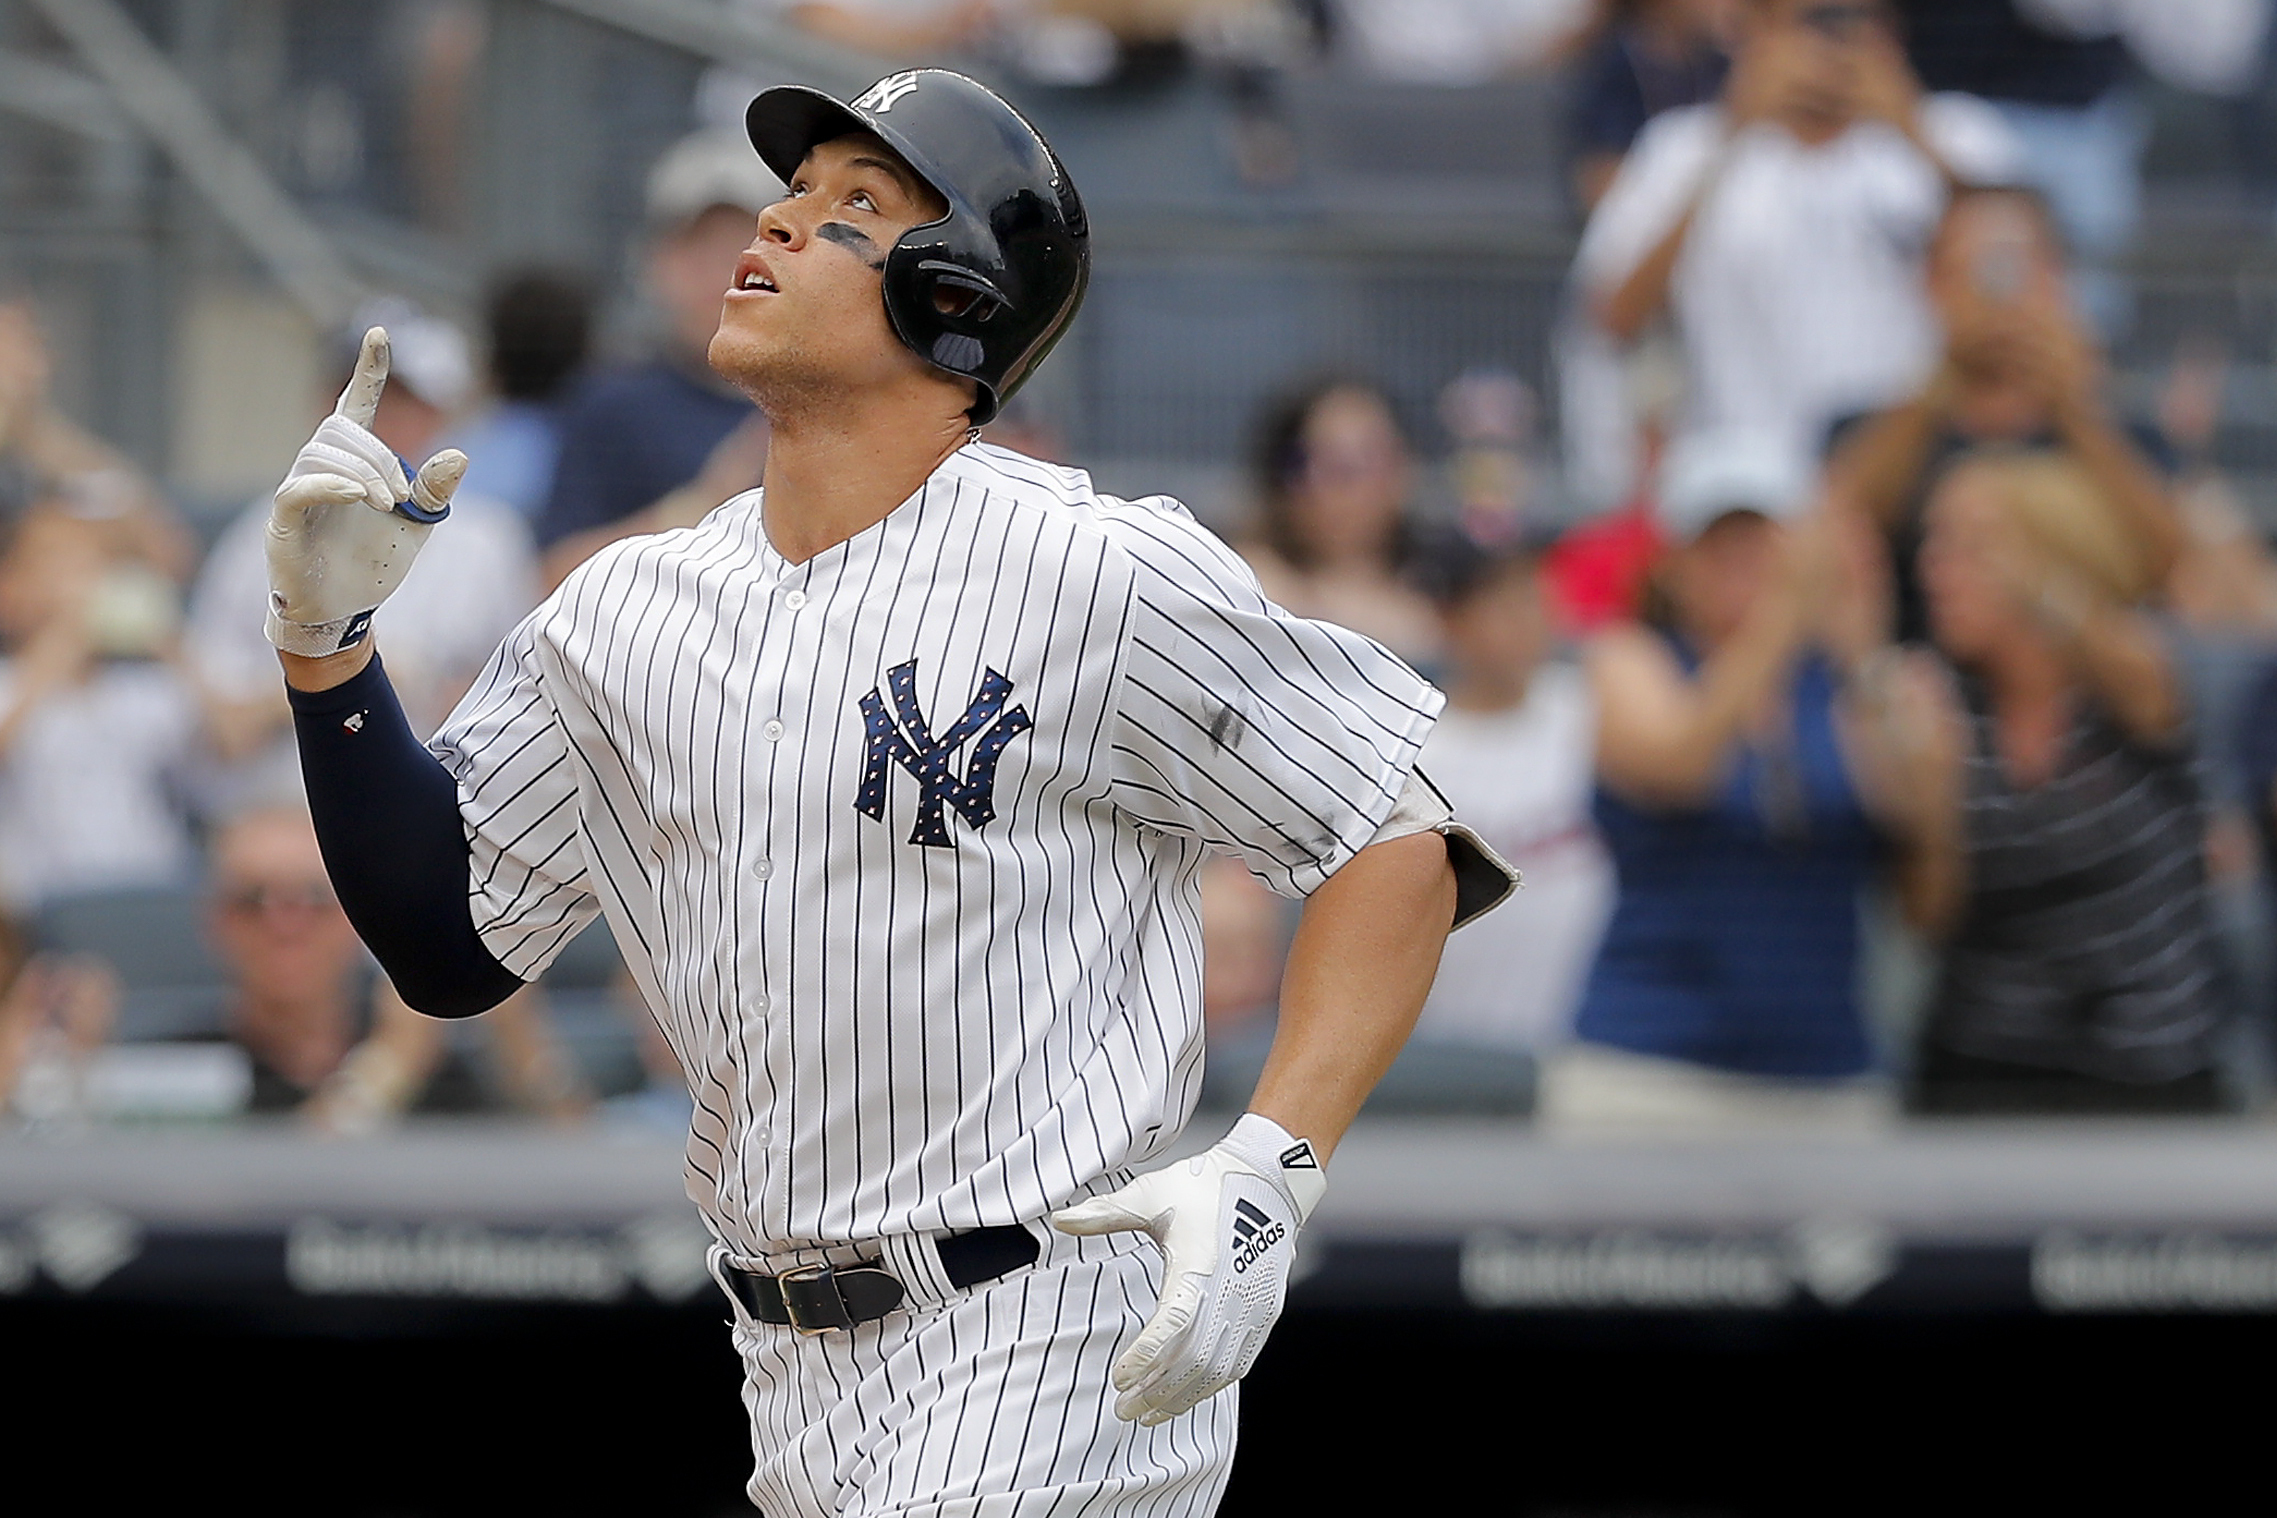 Could Aaron Judge go to the Colorado Rockies? A Locked On Yankees